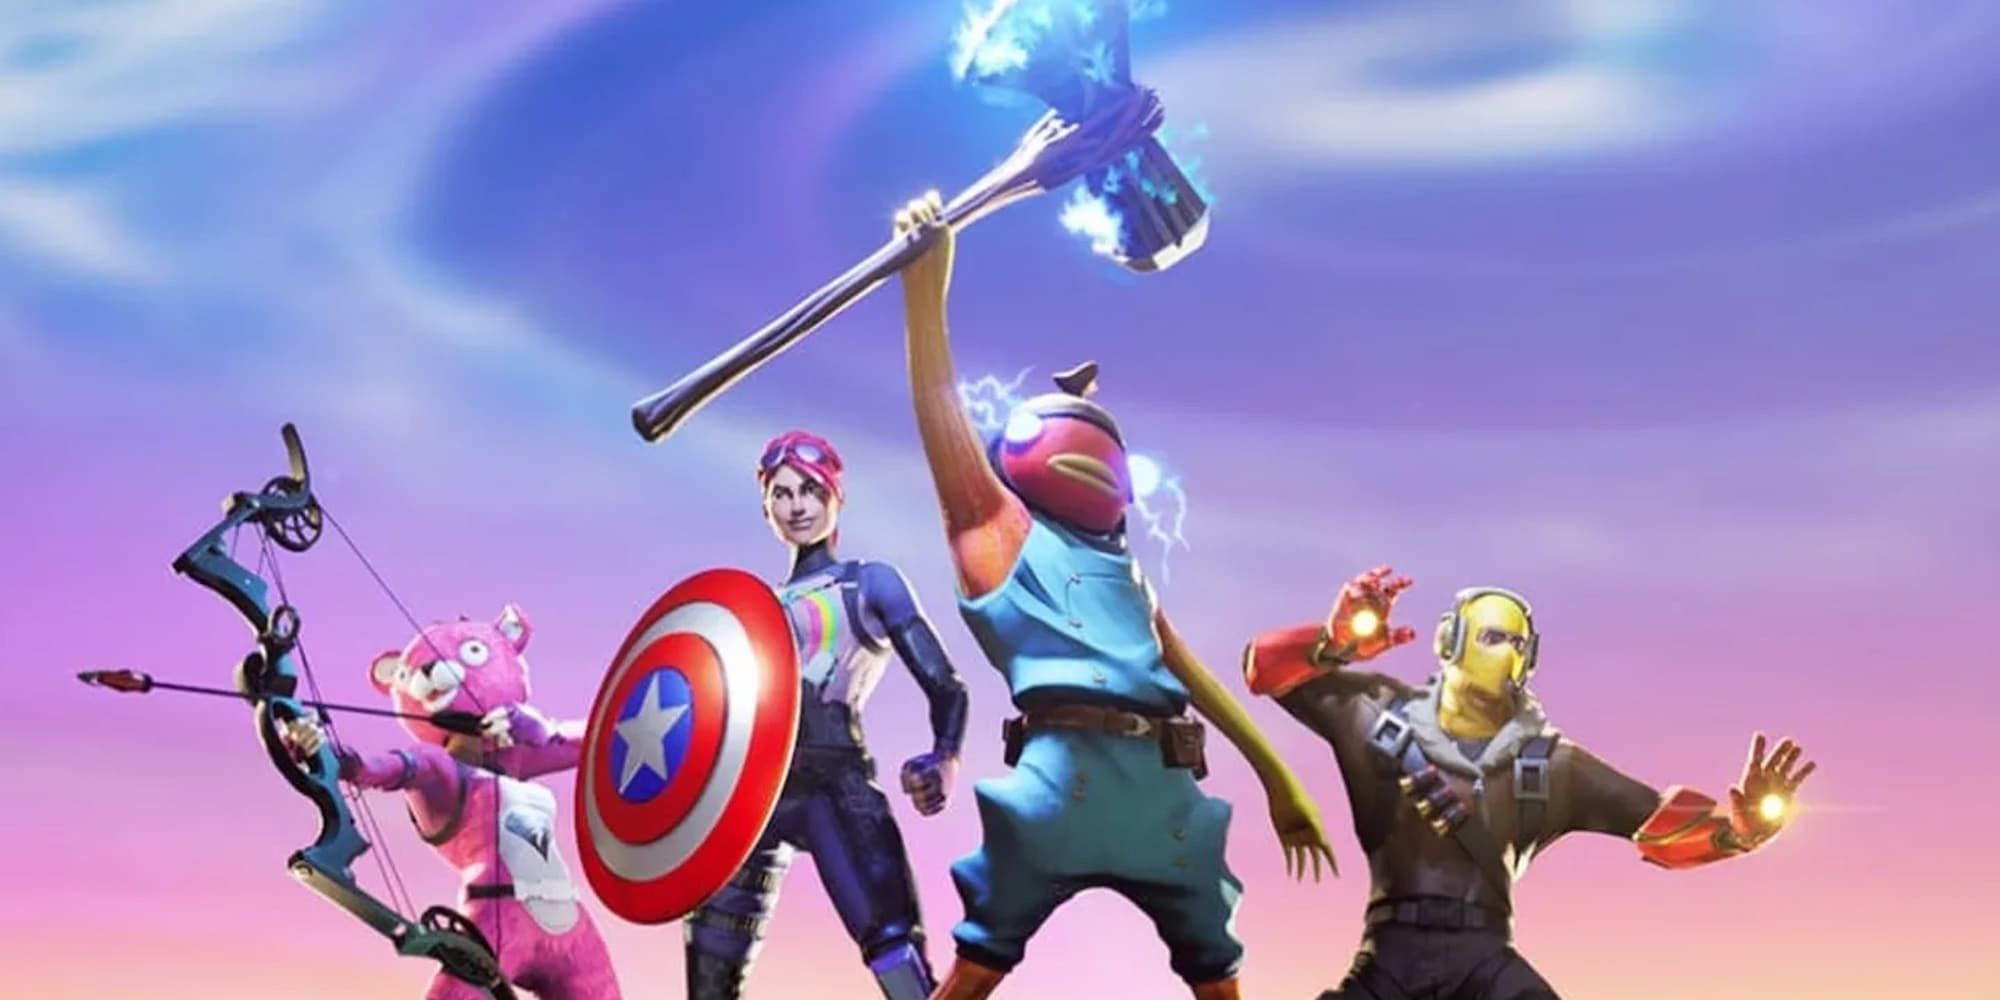 Fishsticks holds Stormbreaker while other Fortnite characters wield iconic Marvel powers and weaponry.